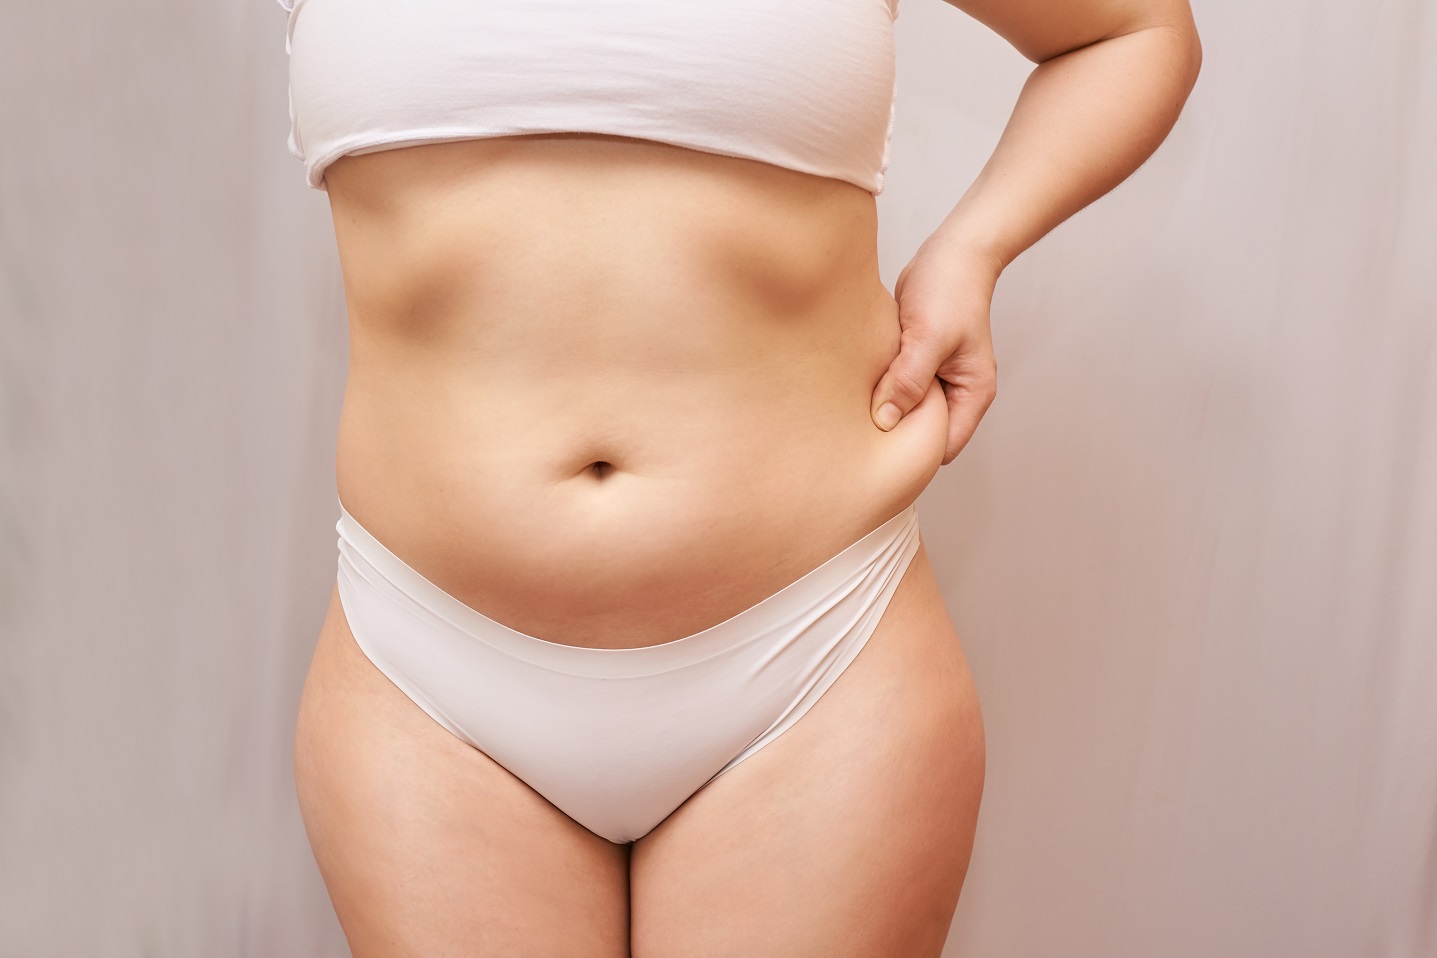 Things You Should Know About Smartlipo